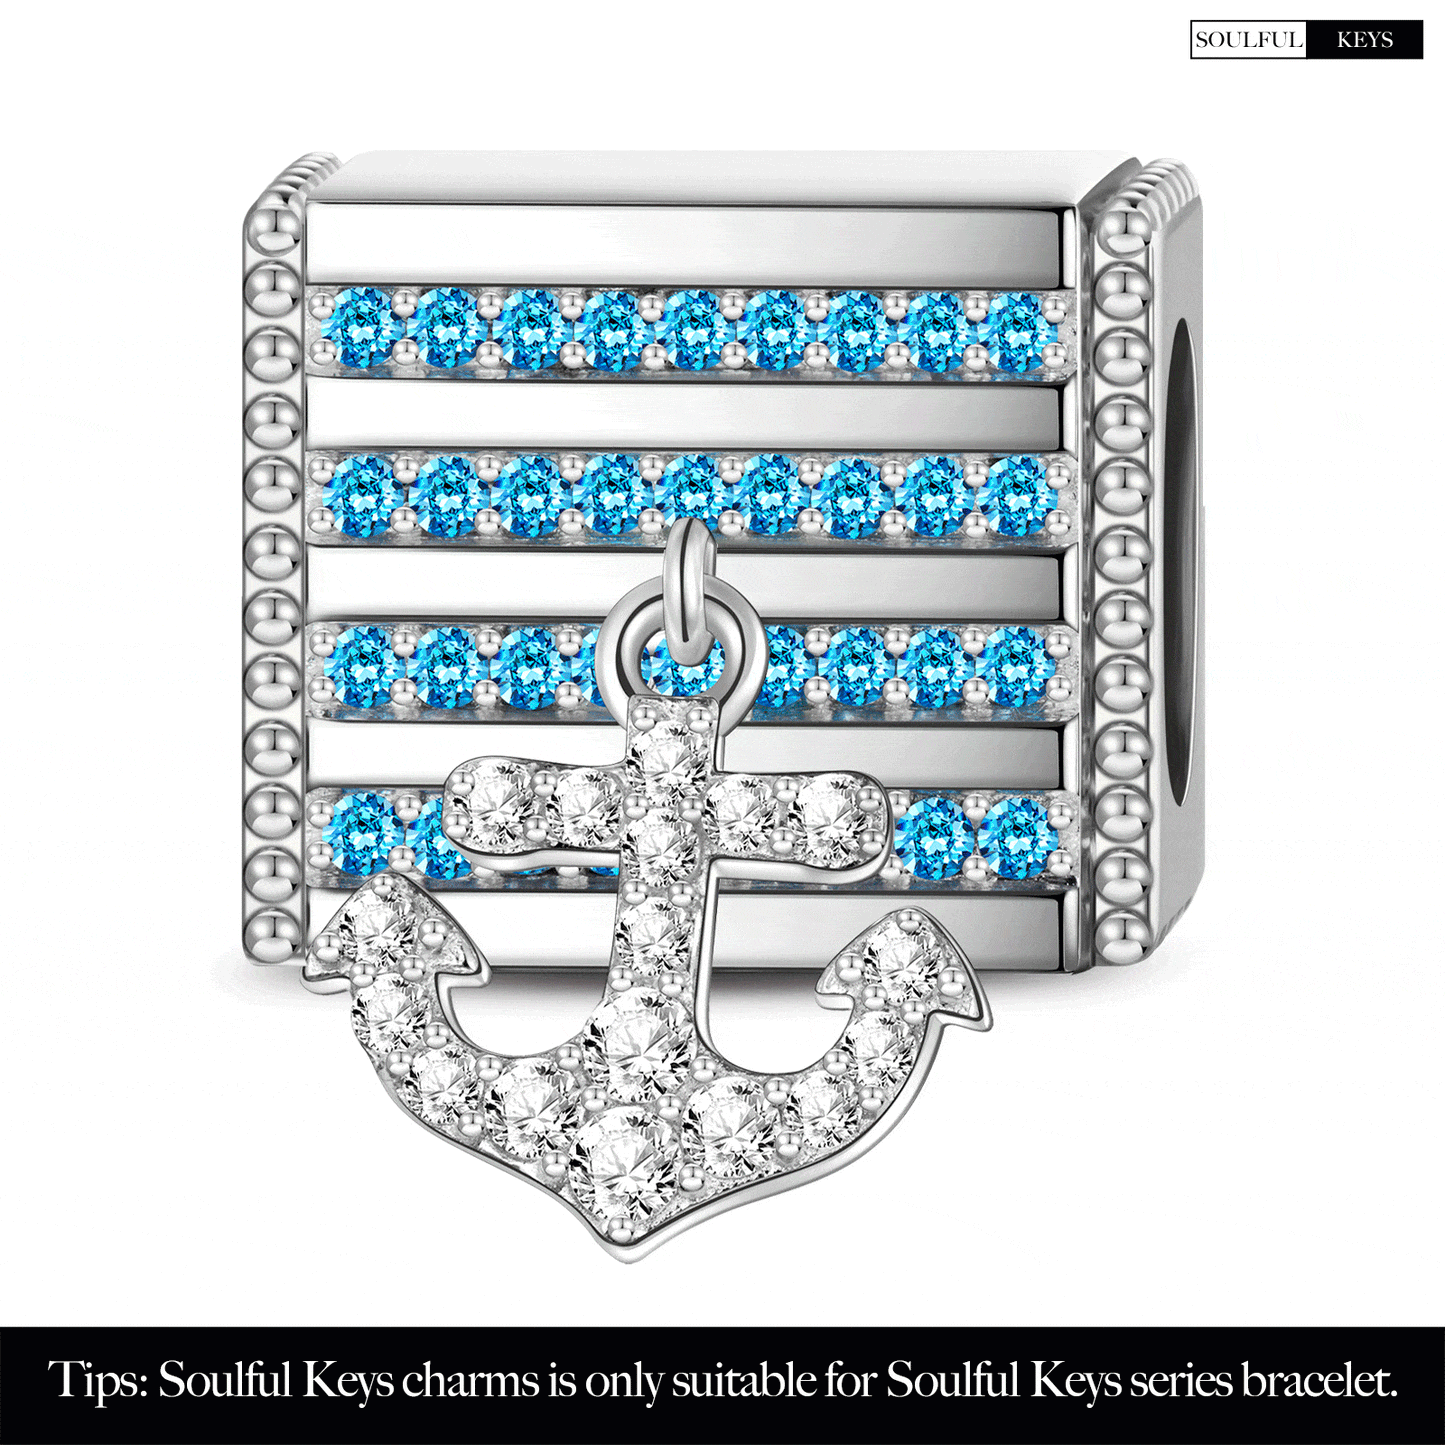 Oceanic Treasures Tarnish-resistant Silver Rectangular Charms In White Gold Plated